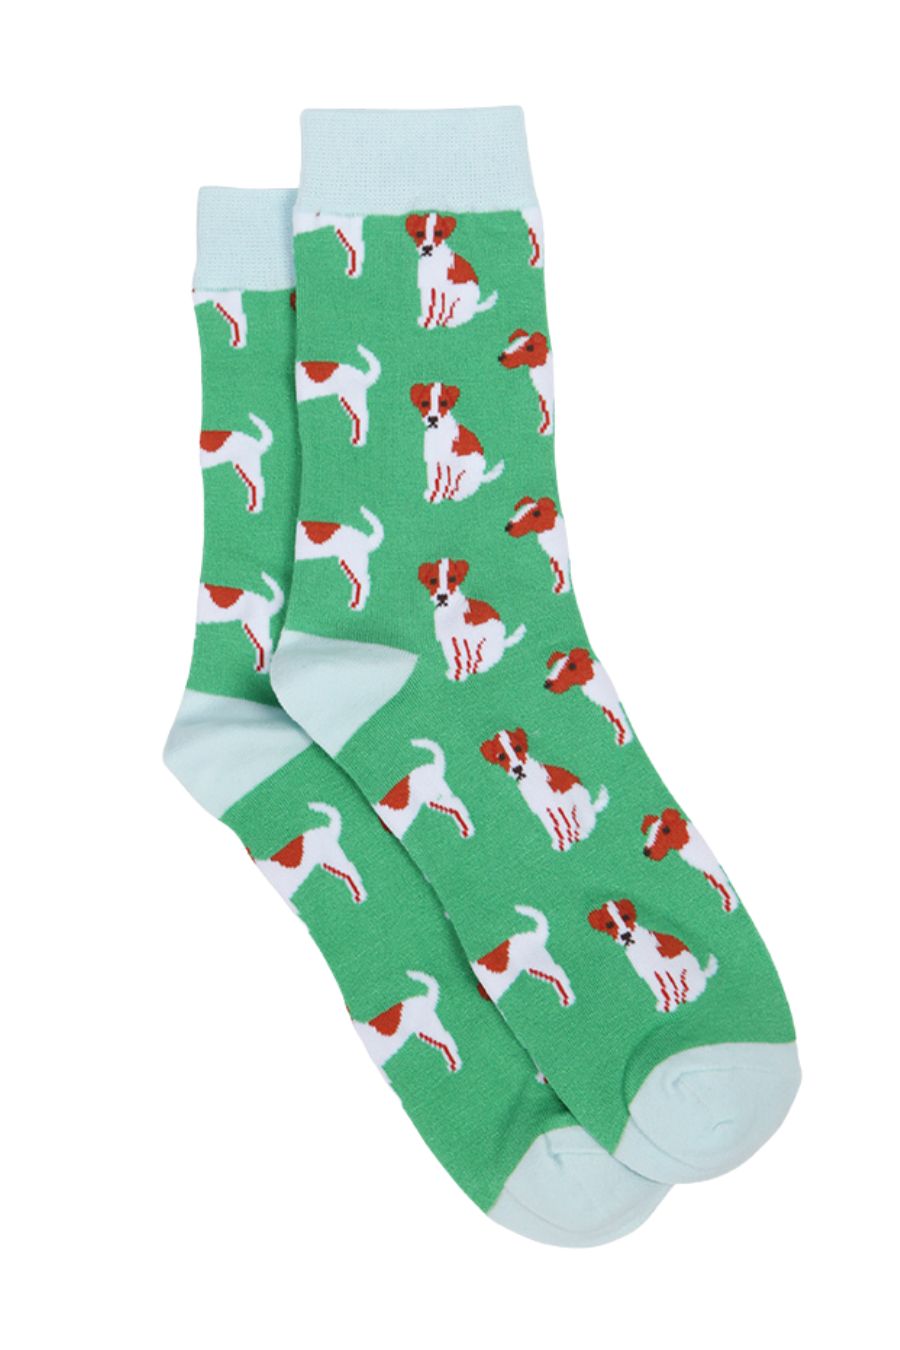 green, blue dress socks with jack russell dogs all over